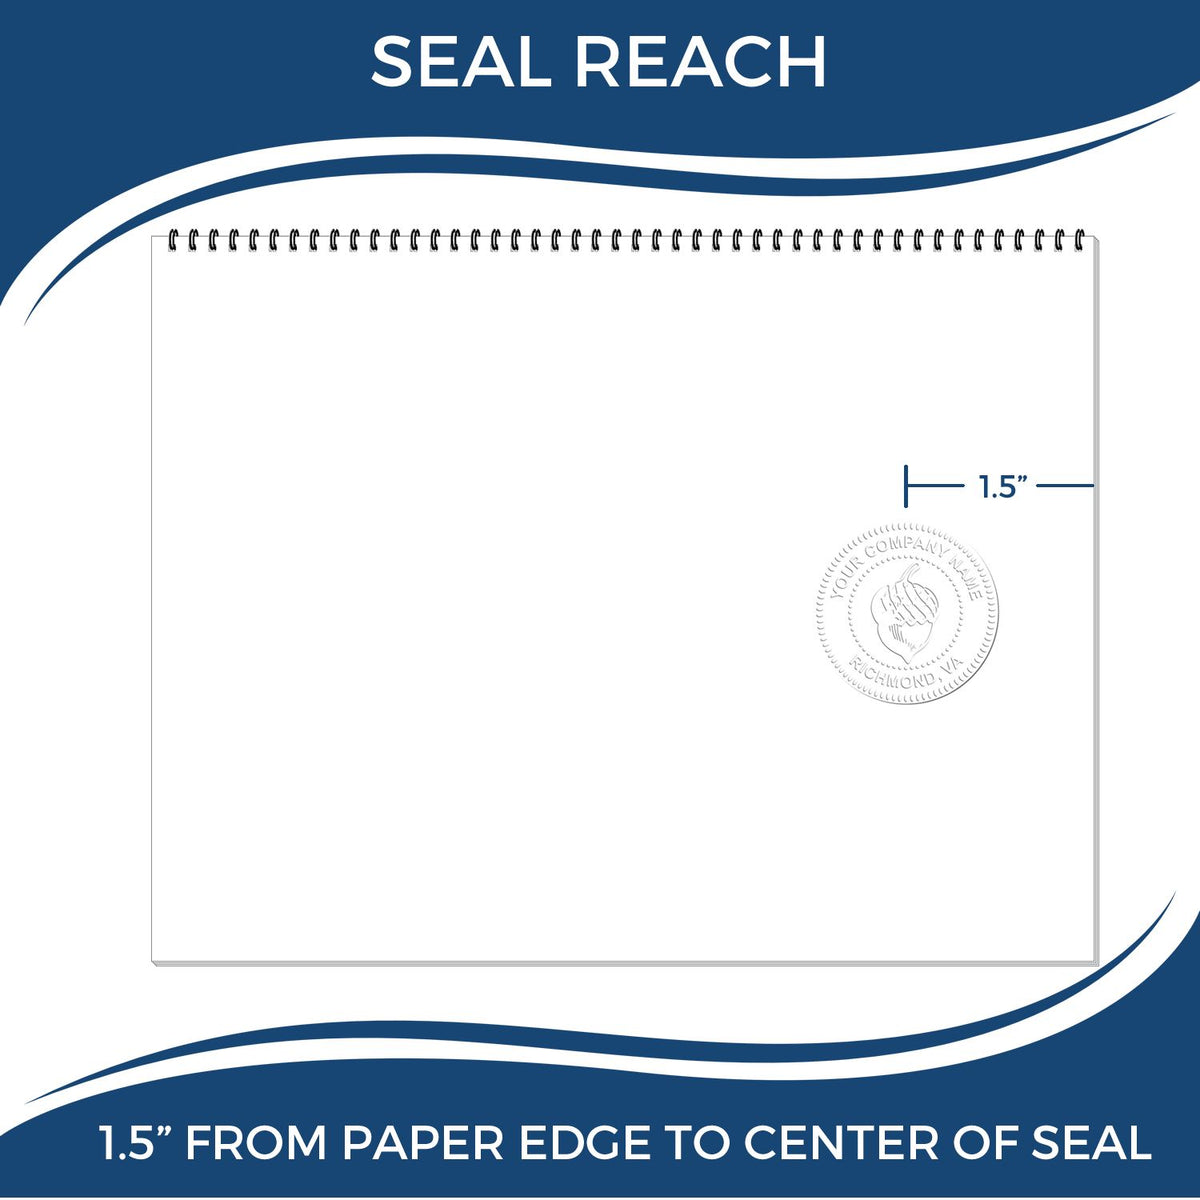 An infographic showing the seal reach which is represented by a ruler and a miniature seal image of the Wyoming Desk Architect Embossing Seal